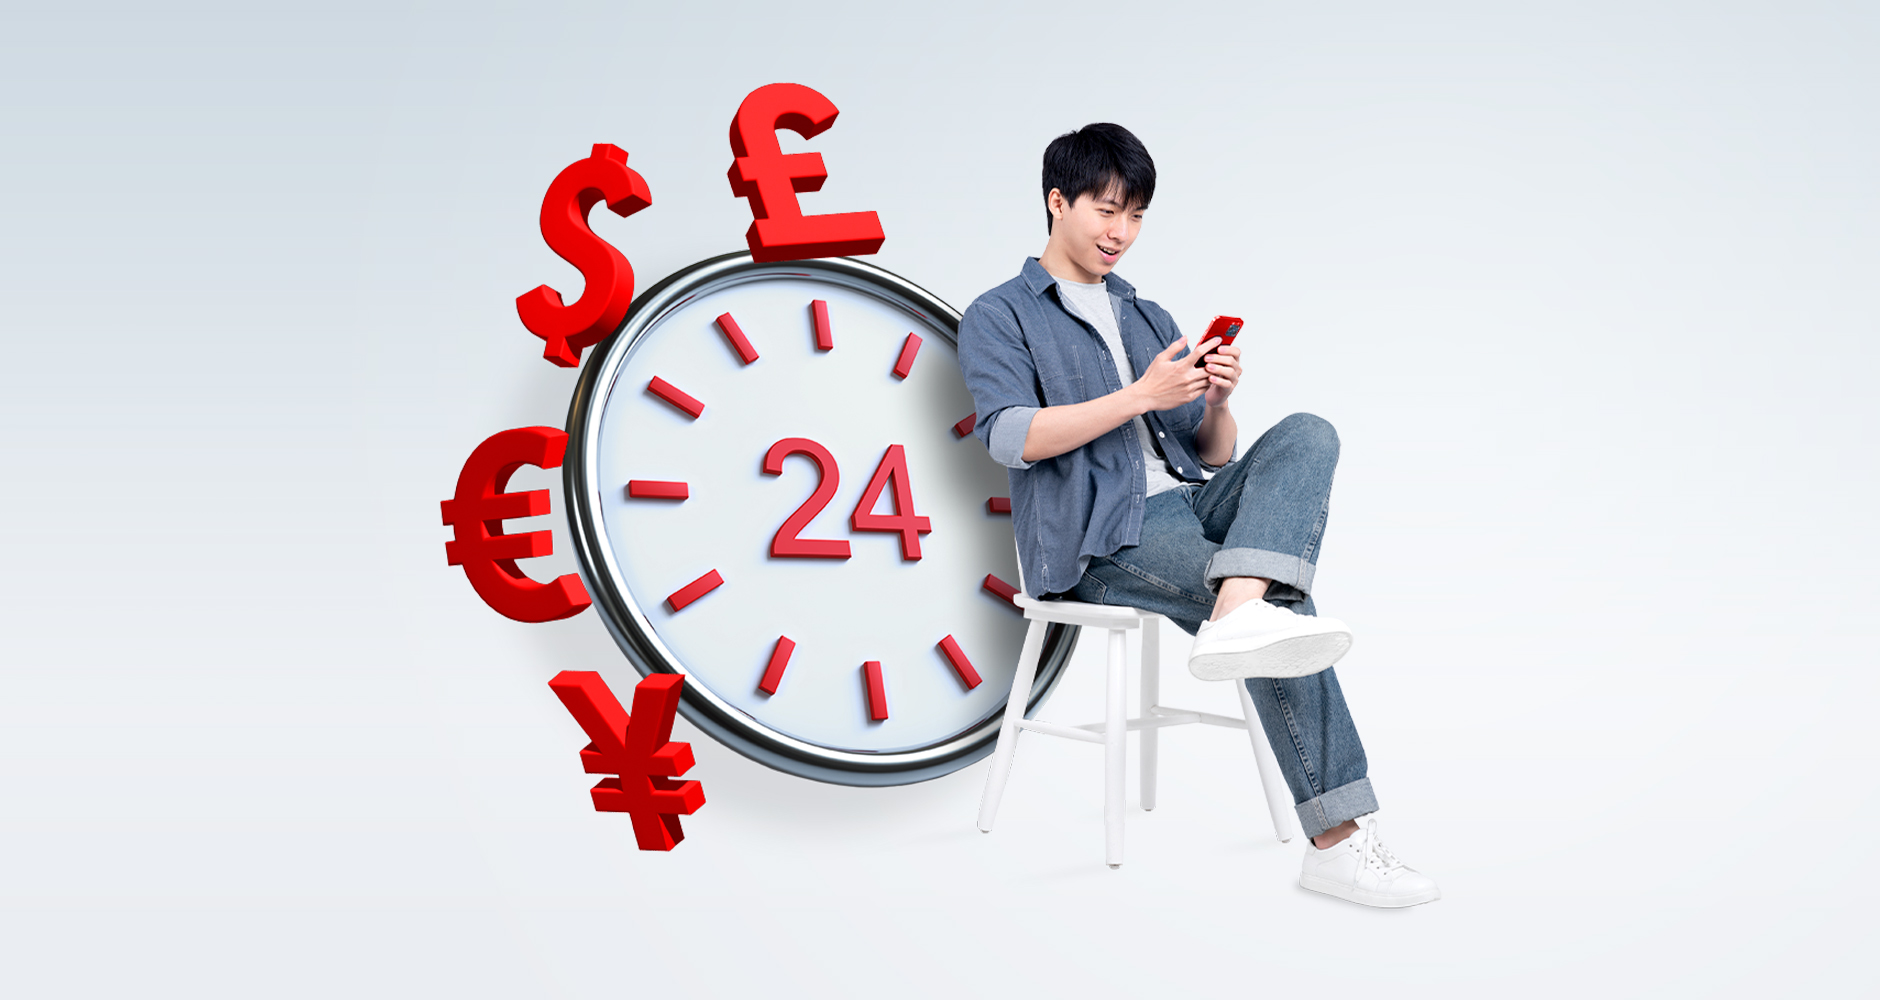 Skip the account service charge with our Online Foreign Exchange service